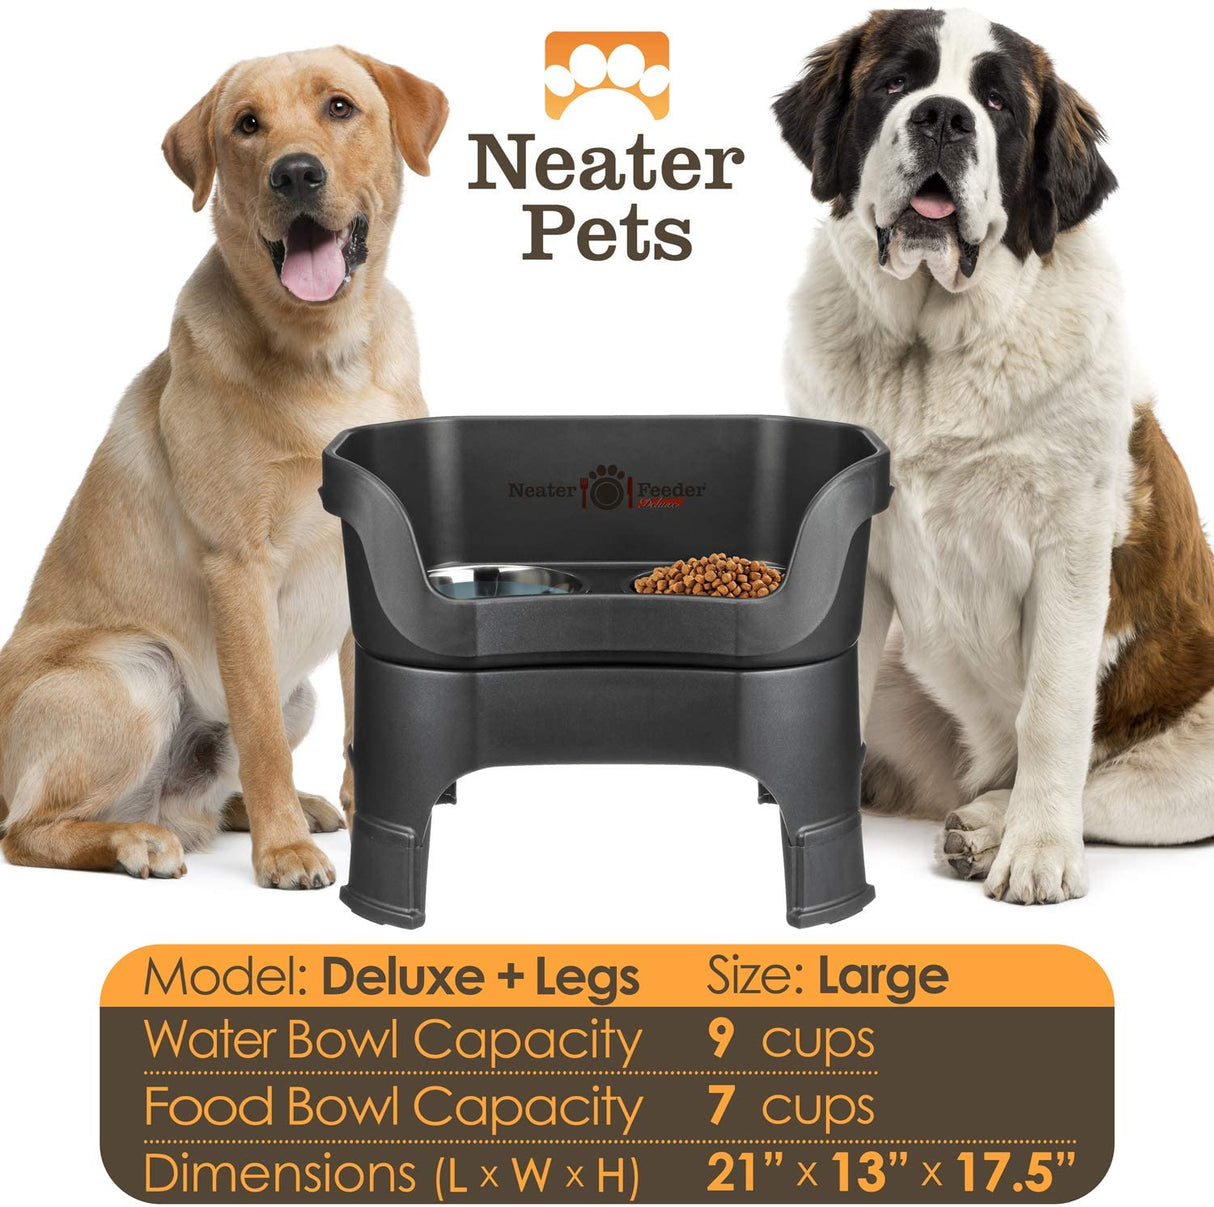 Midnight Black Large Dog with leg extensions bowl capacity